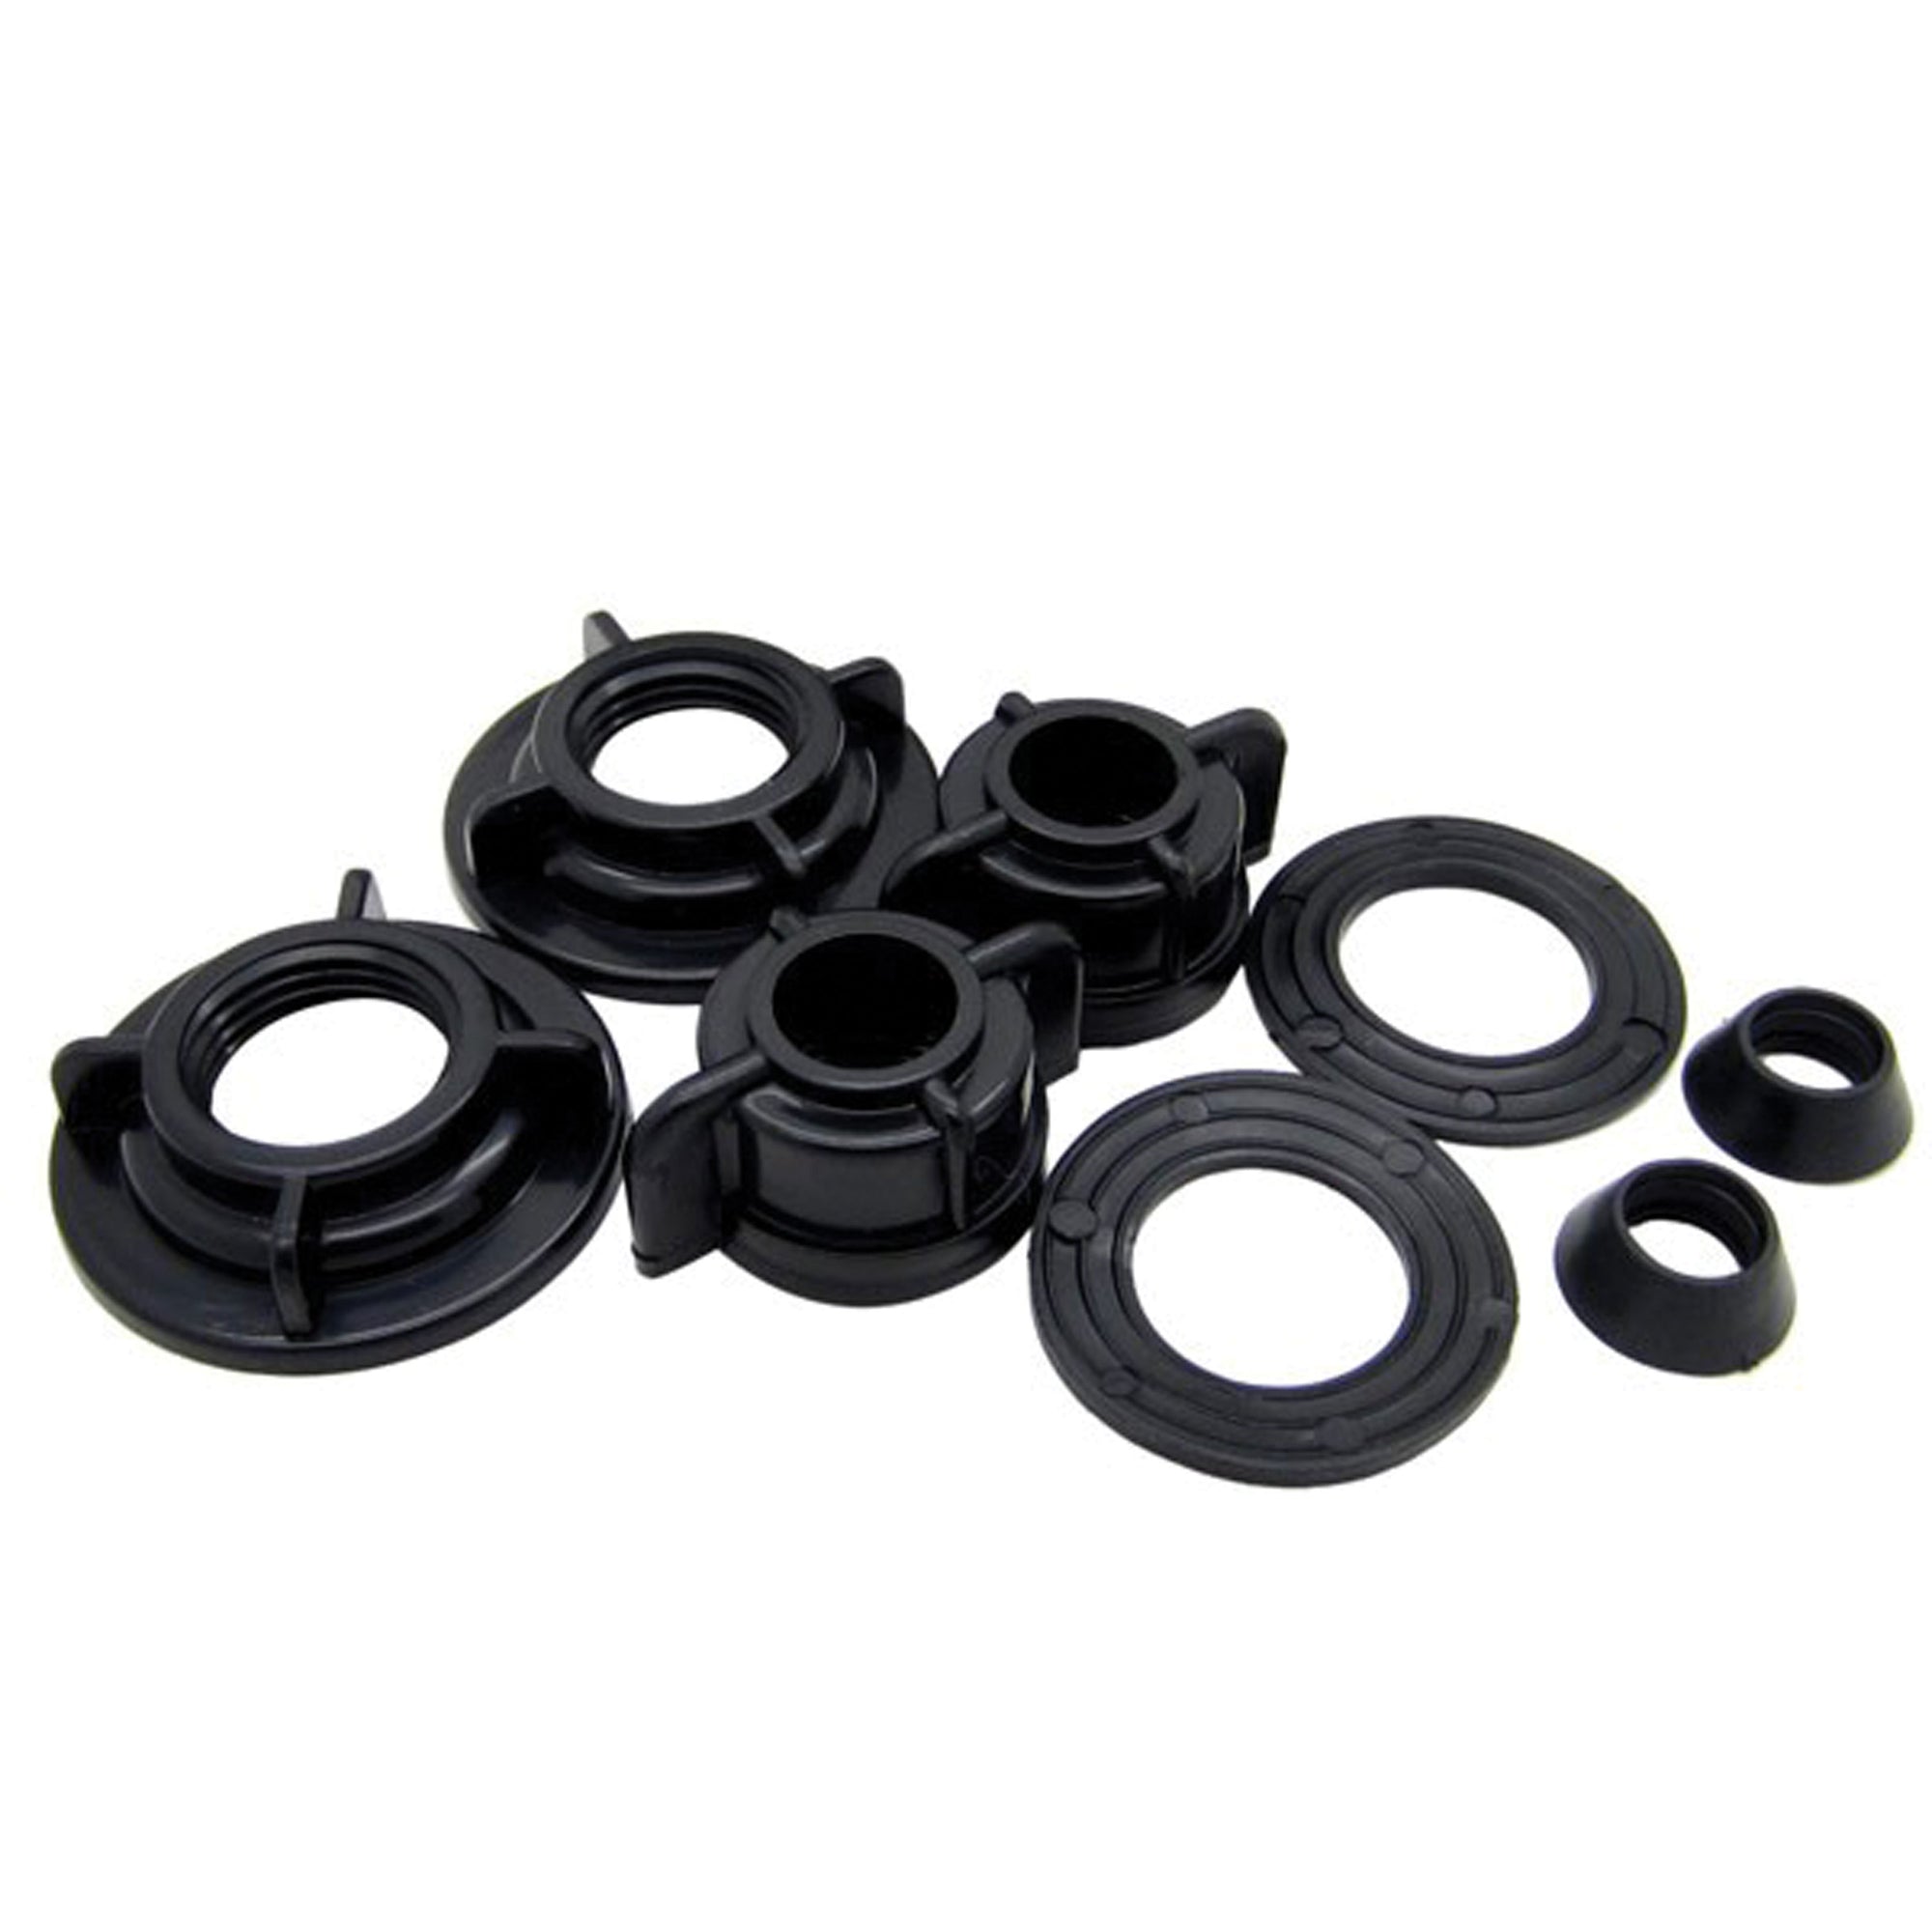 Dura Faucet RV Faucet Mounting Washers and Nuts